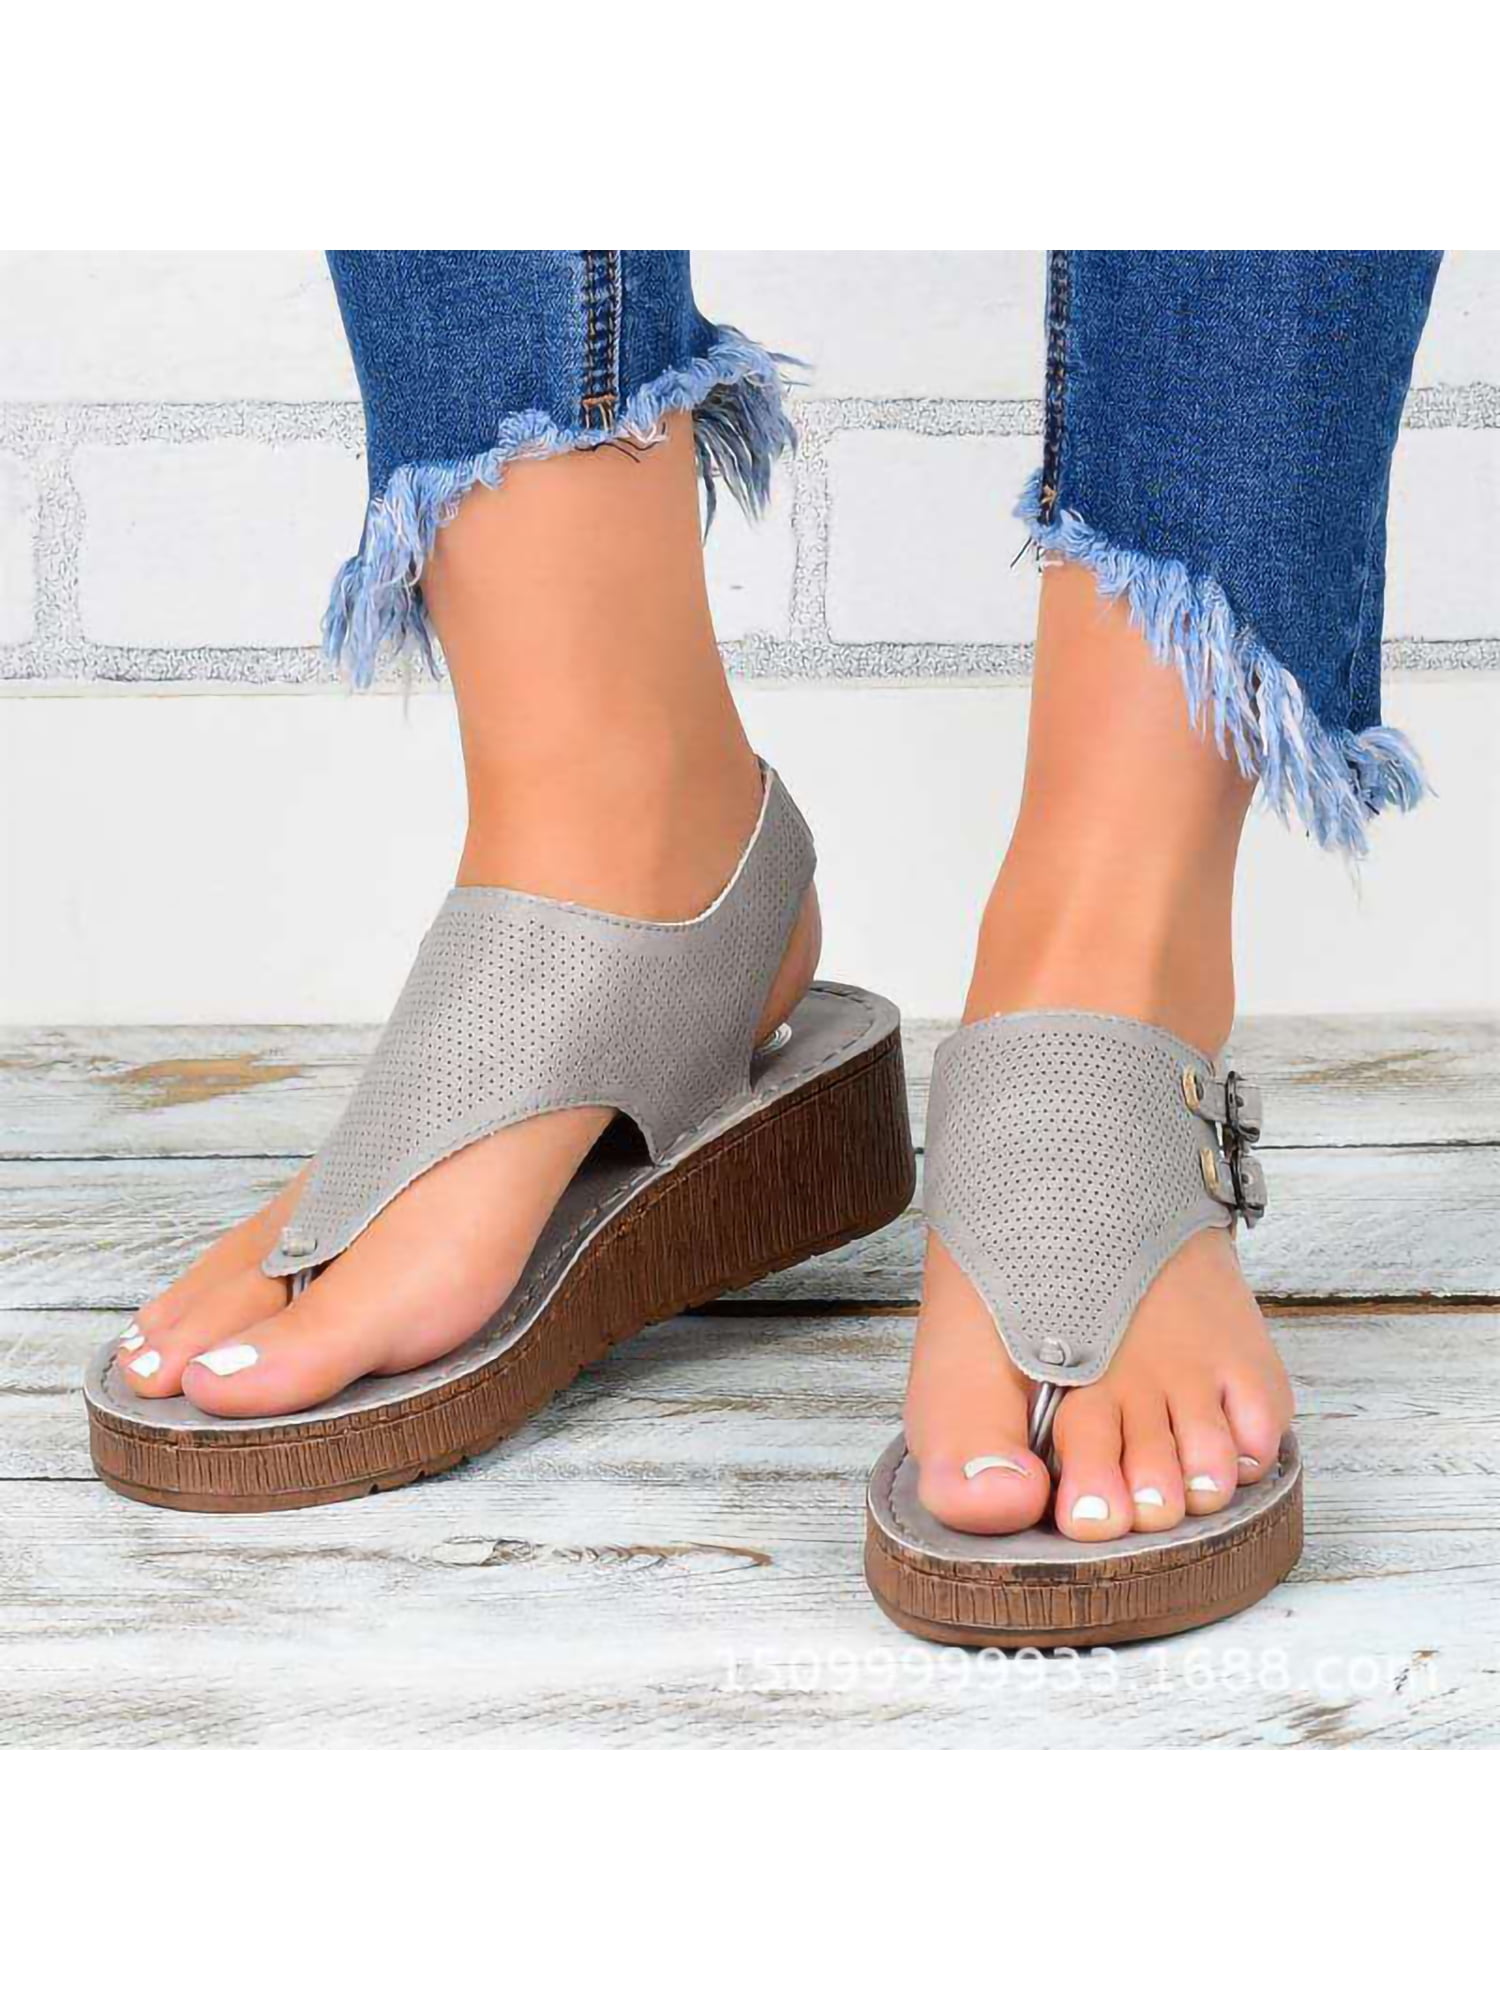 Daeful Flip Flops for Women Comfortable Arch Support Sandals Thong T-Strap  Casual Summer Wide Width Sandals